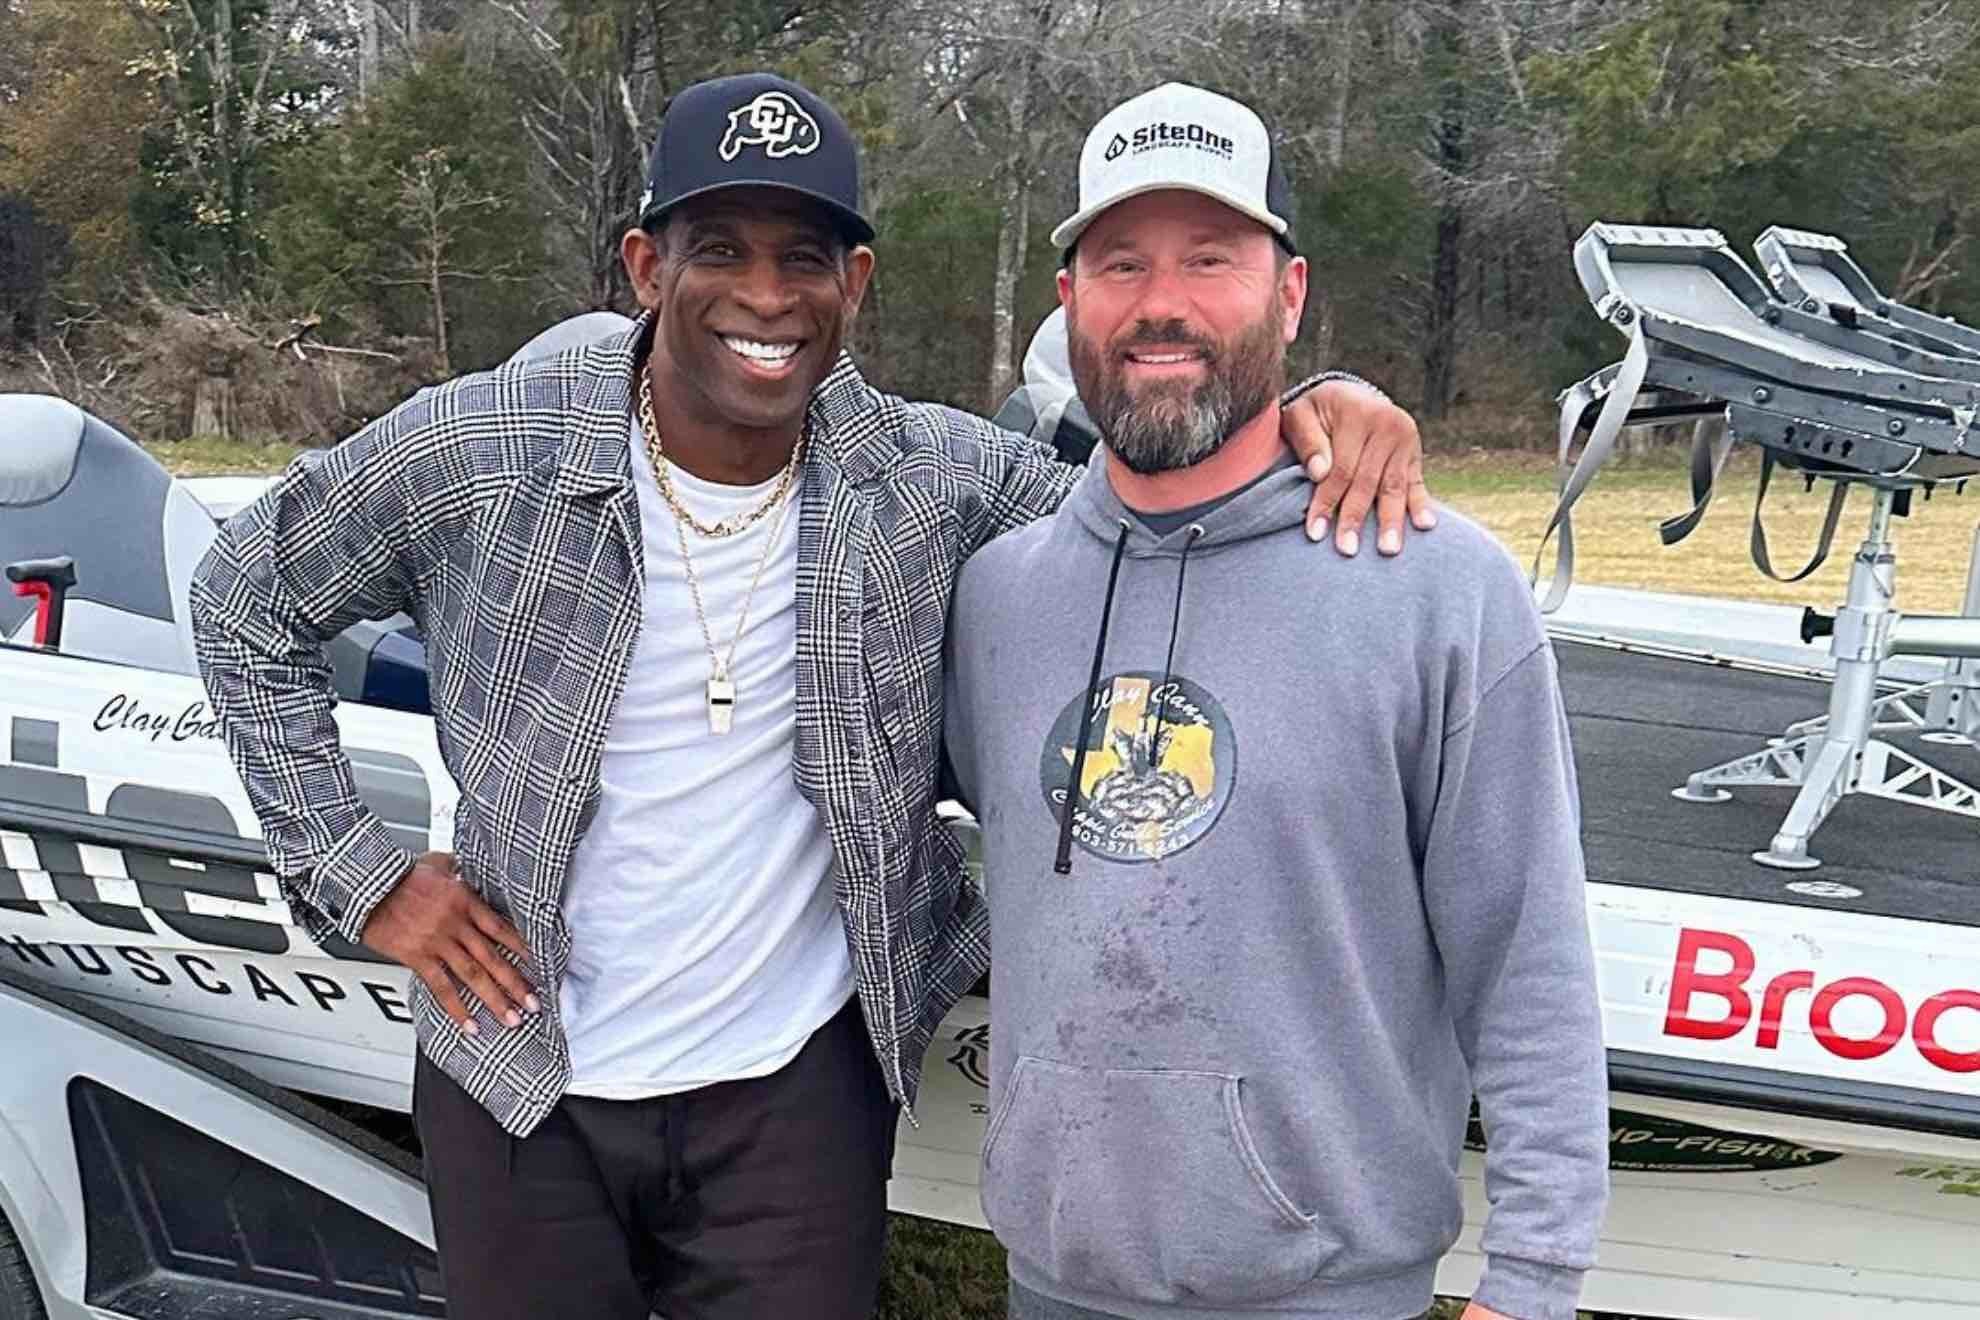 Deion Sanders loves fishing and other outdoor activities